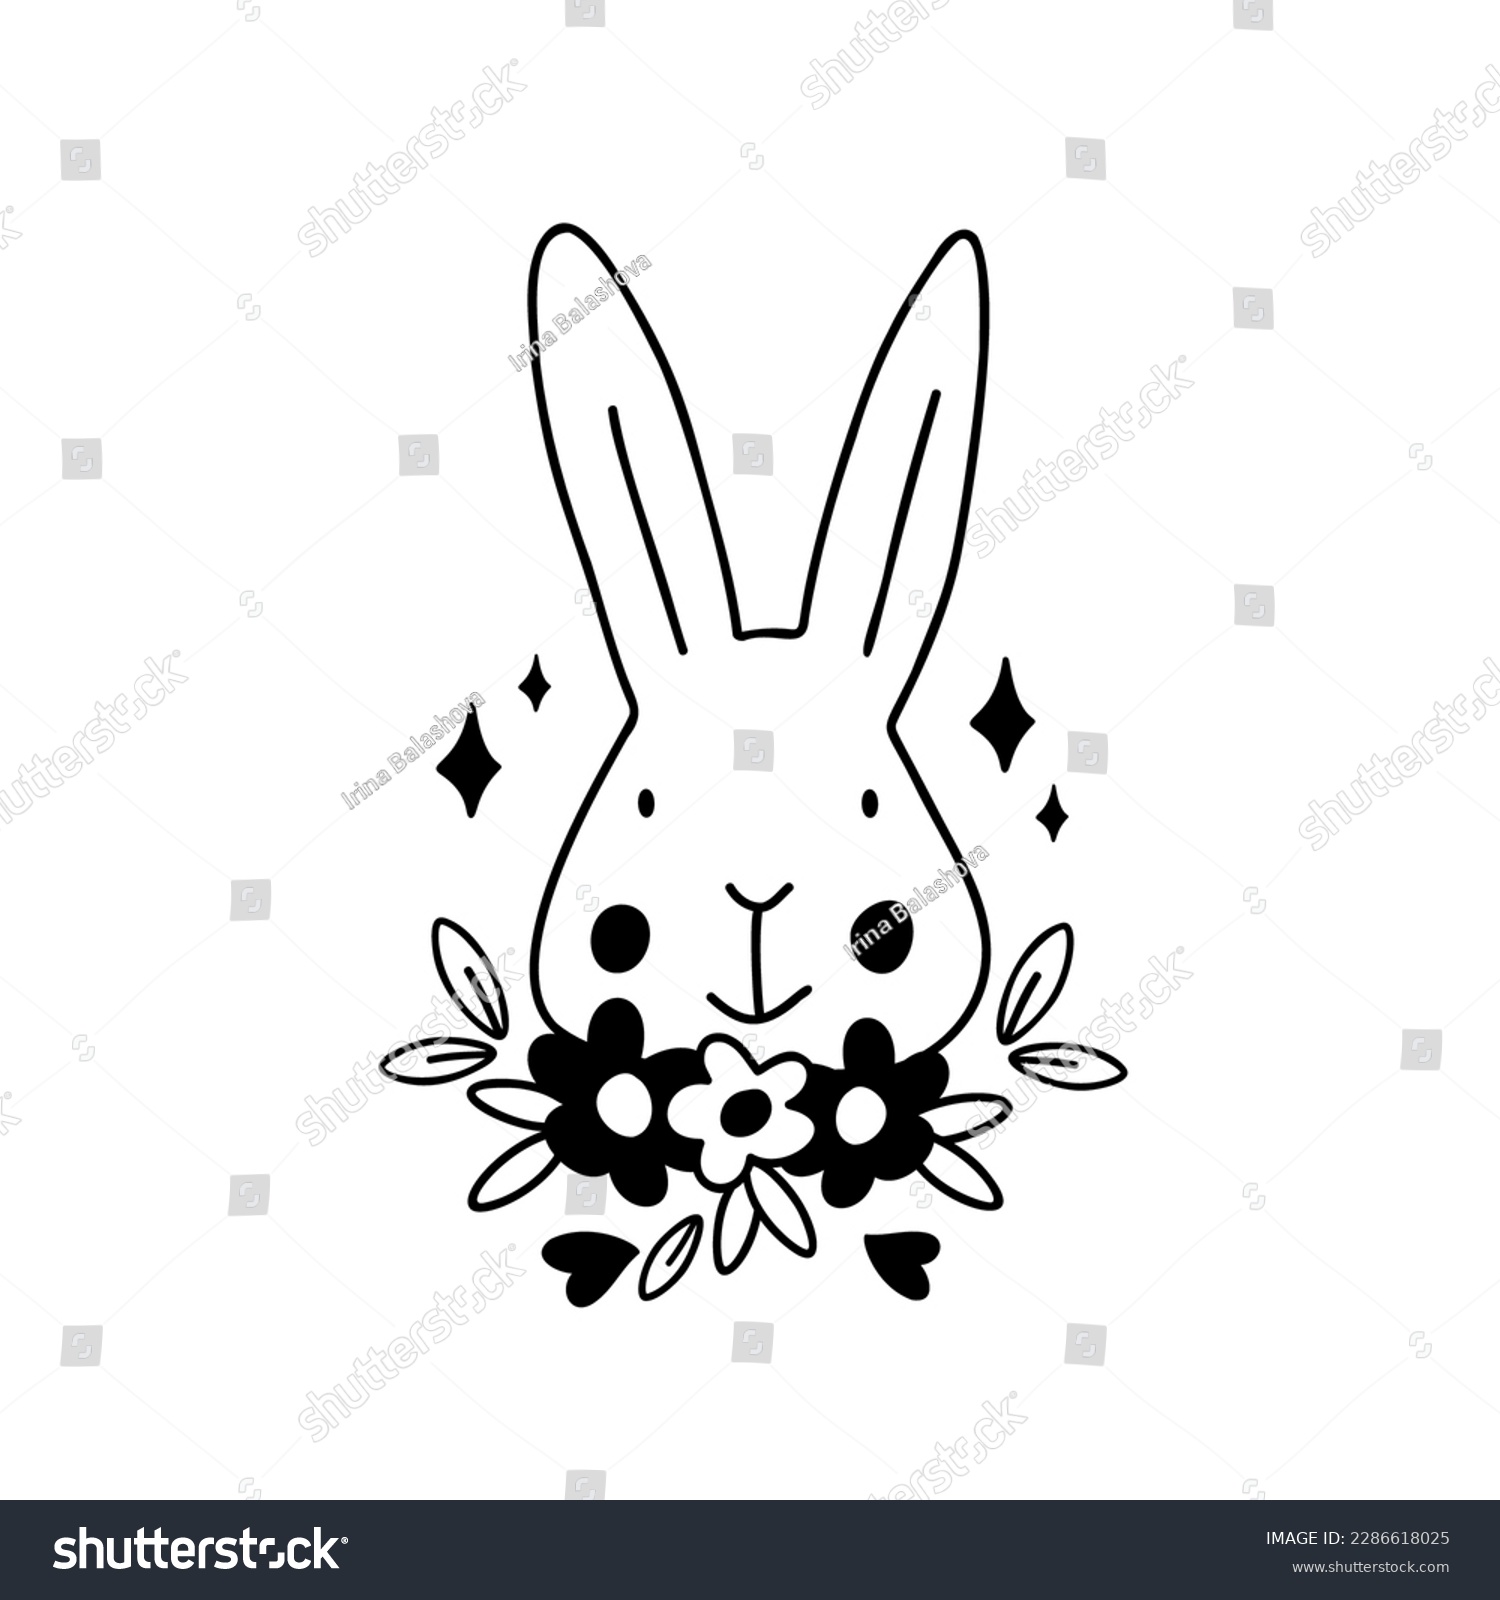 SVG of Cute Rabbit bunny SVG Cut File Design for Cricut and Silhouette. svg